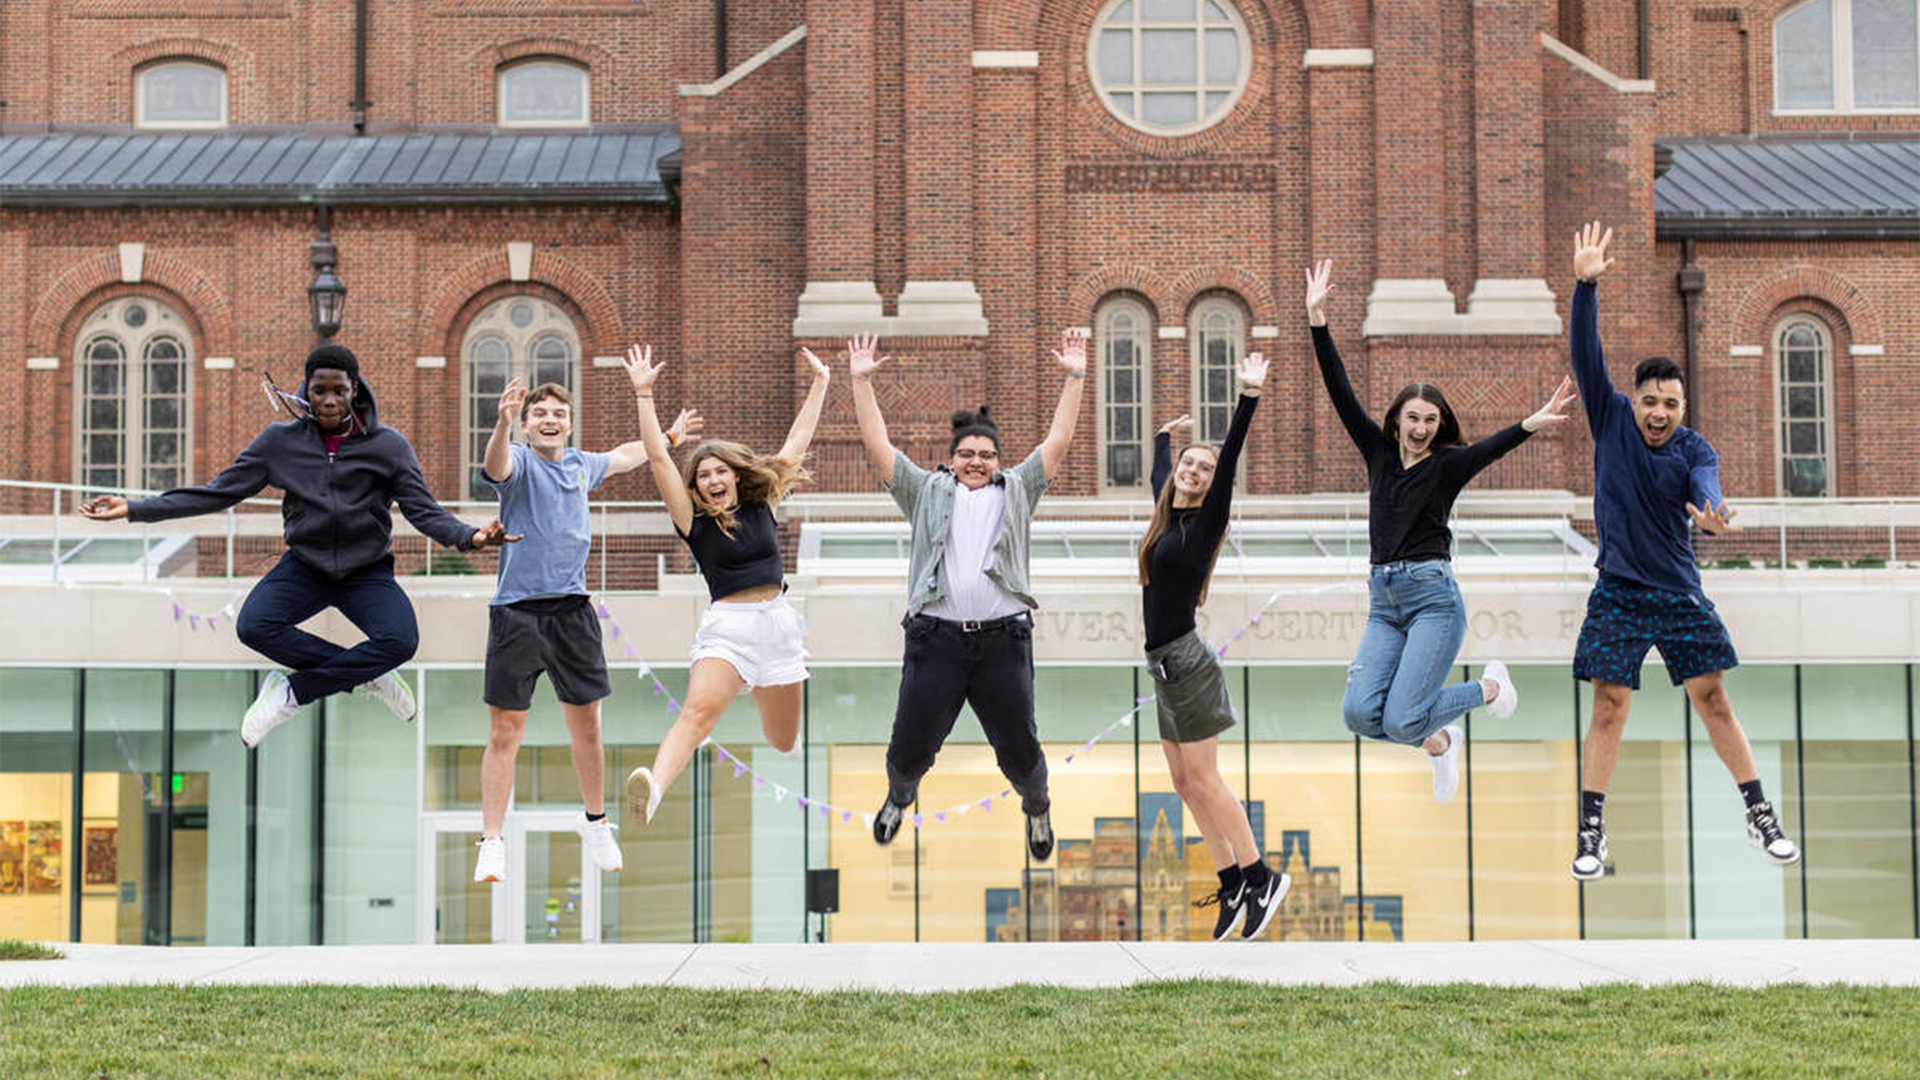 Students jumping to say thank you to donors